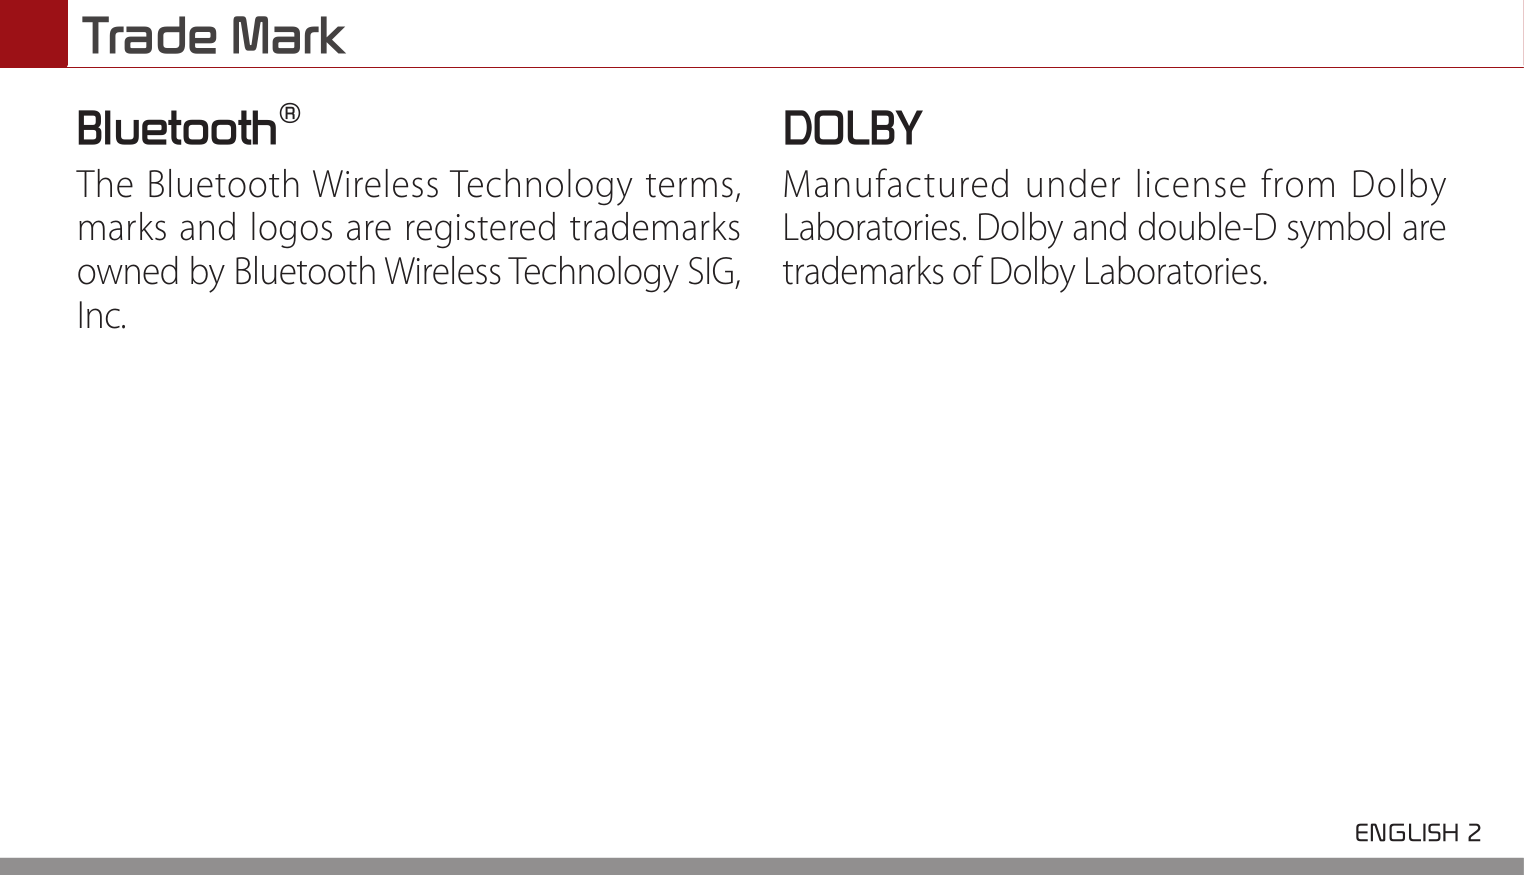 Trade Mark ENGLISH 2 Bluetooth®The Bluetooth Wireless Technology terms, marks and logos are registered trademarks owned by Bluetooth Wireless Technology SIG, Inc. DOLBYManufactured under license from Dolby Laboratories. Dolby and double-D symbol are trademarks of Dolby Laboratories.